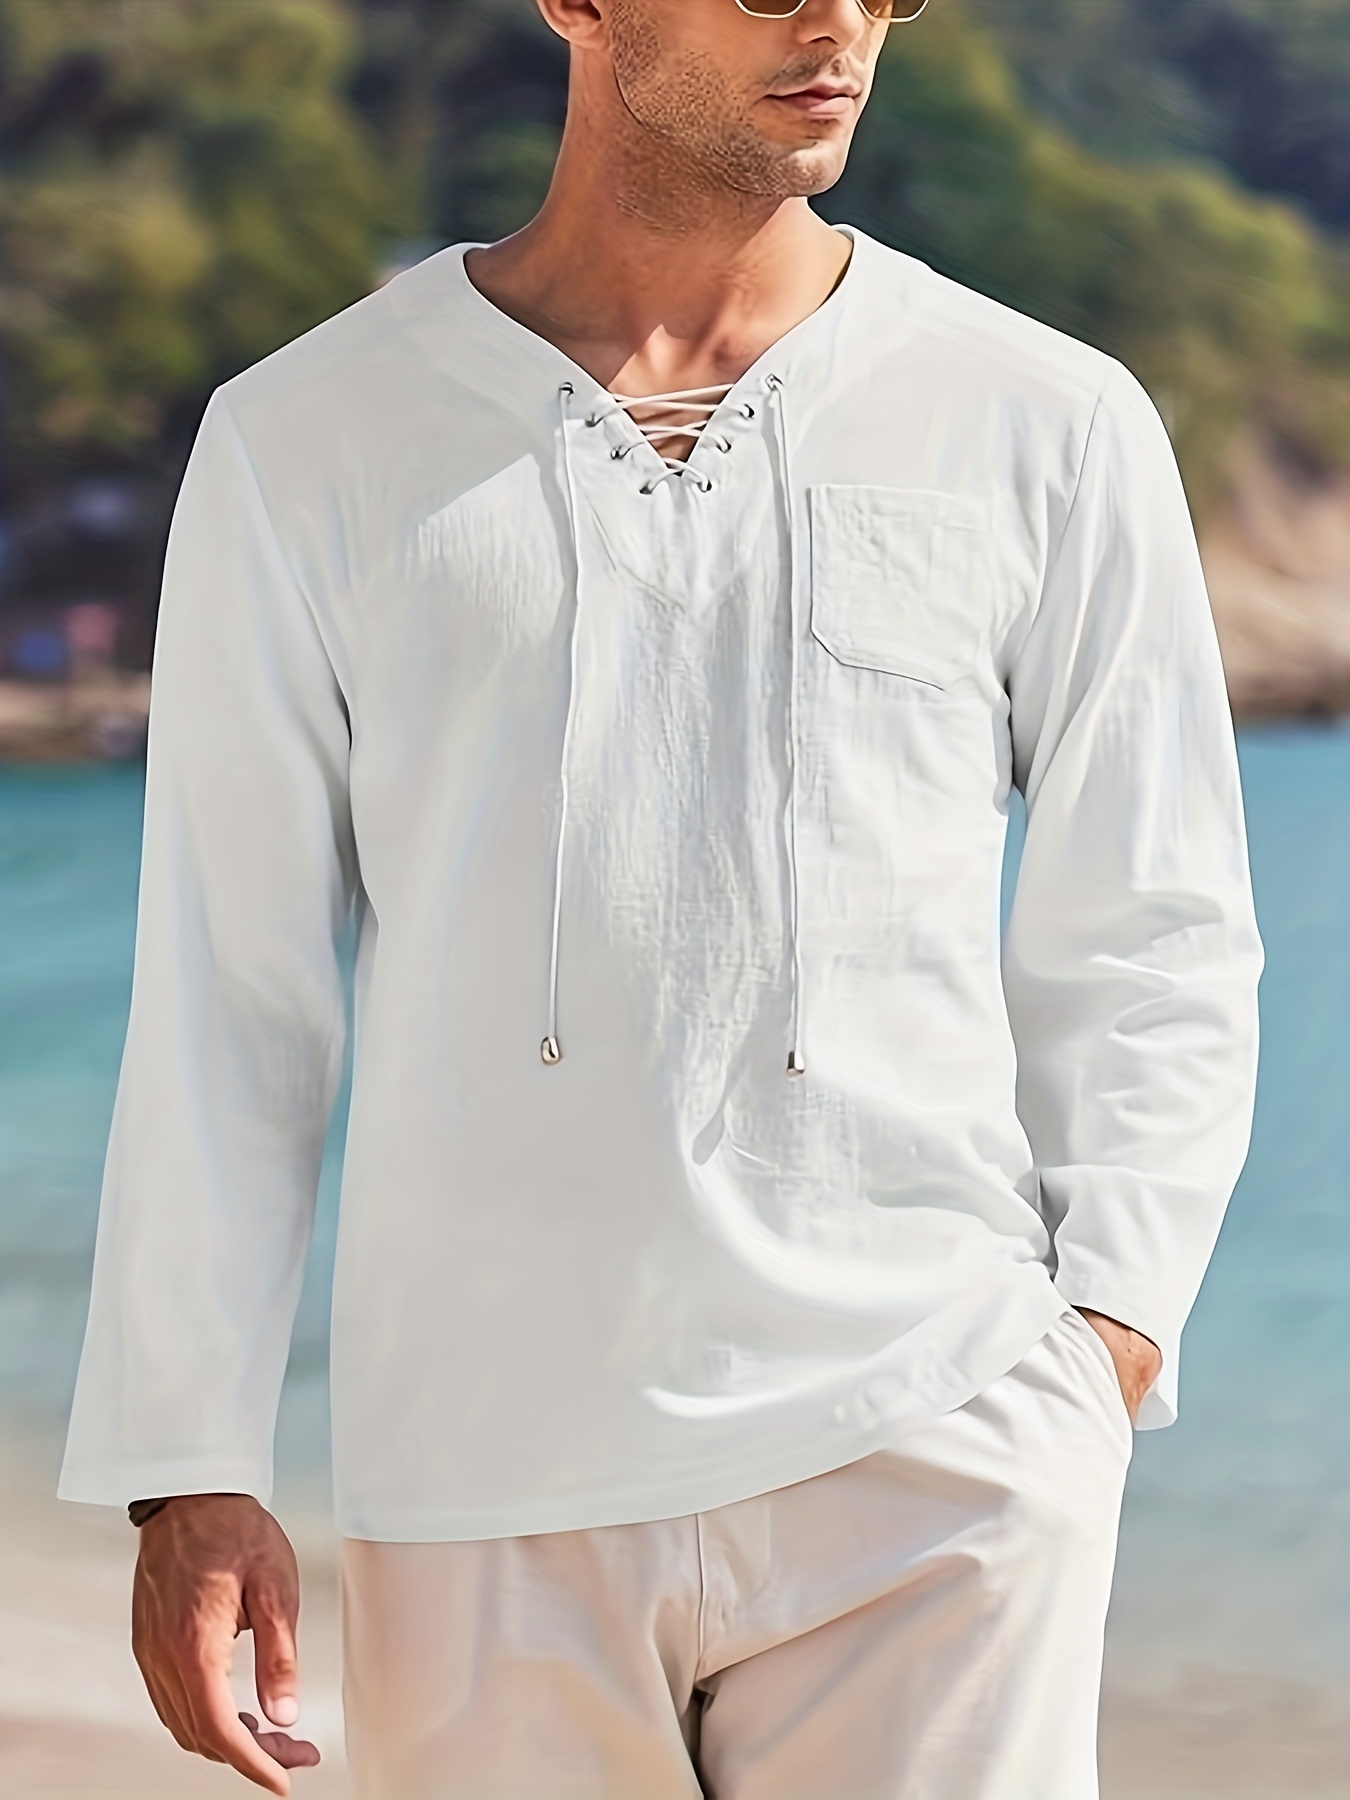 Men's Linen Shirt Medieval Retro Lace-up V-Neck Gothic Long Sleeve T-Shirts  Hippie Casual Summer Ethnic Beach Yoga Top